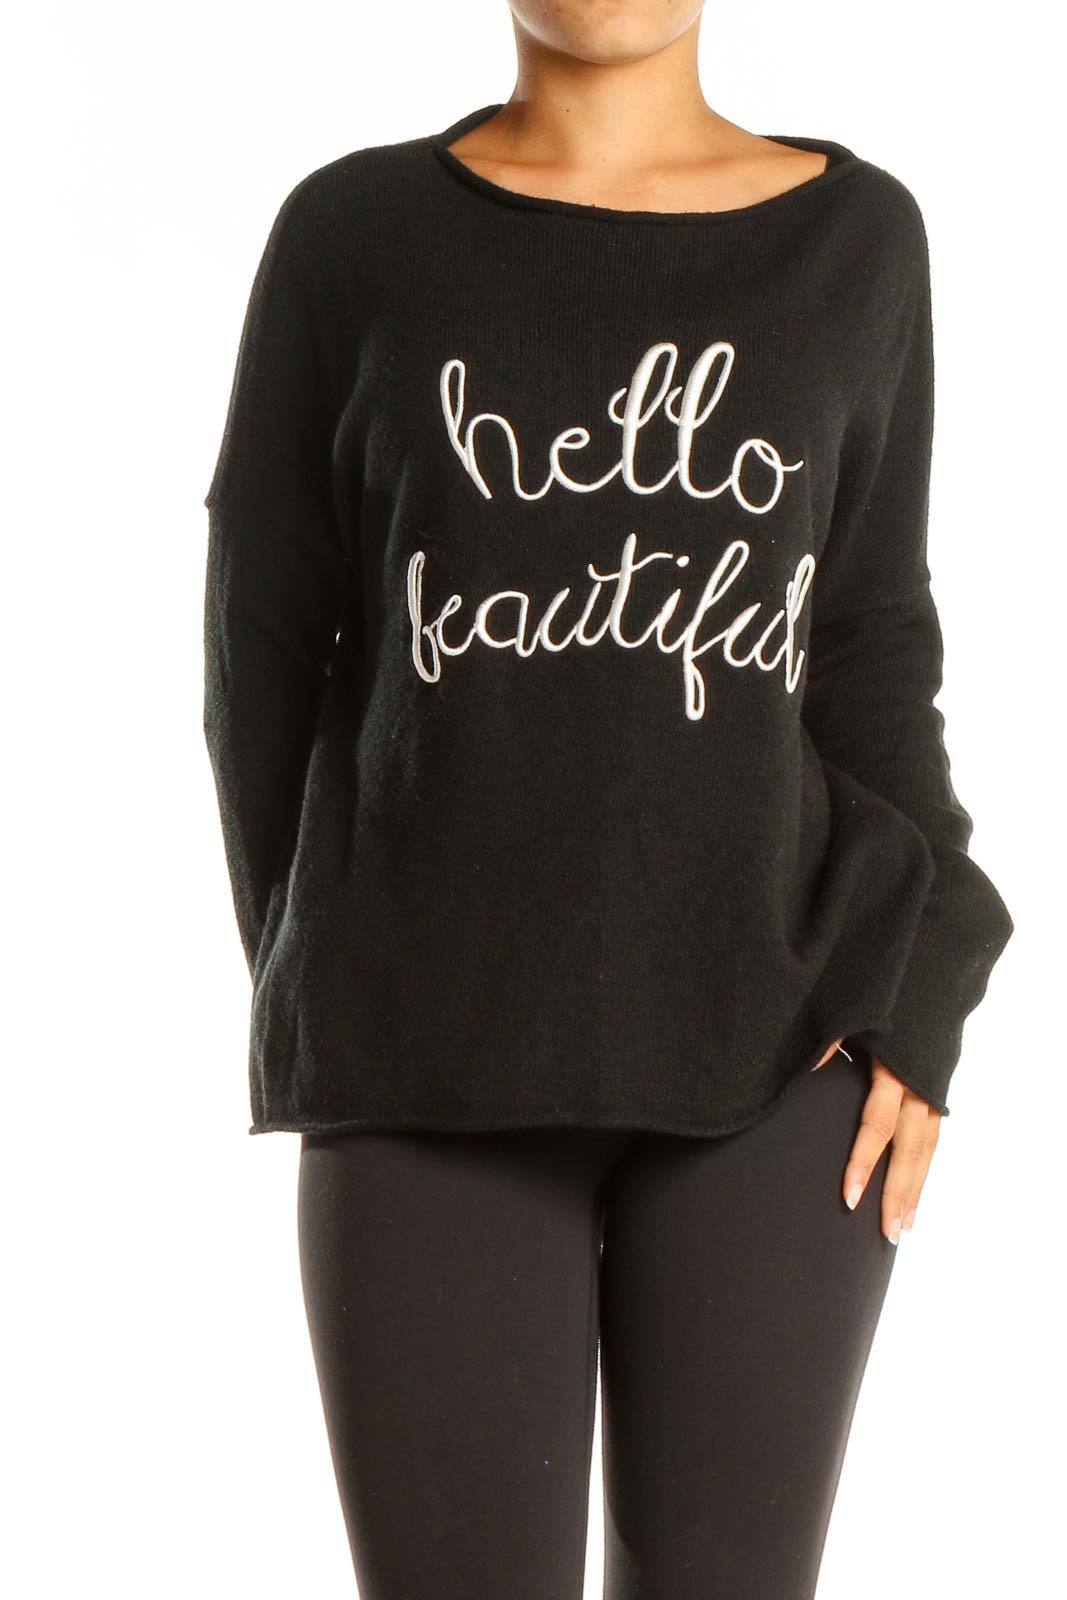 Black Graphic Print All Day Wear Sweater Front